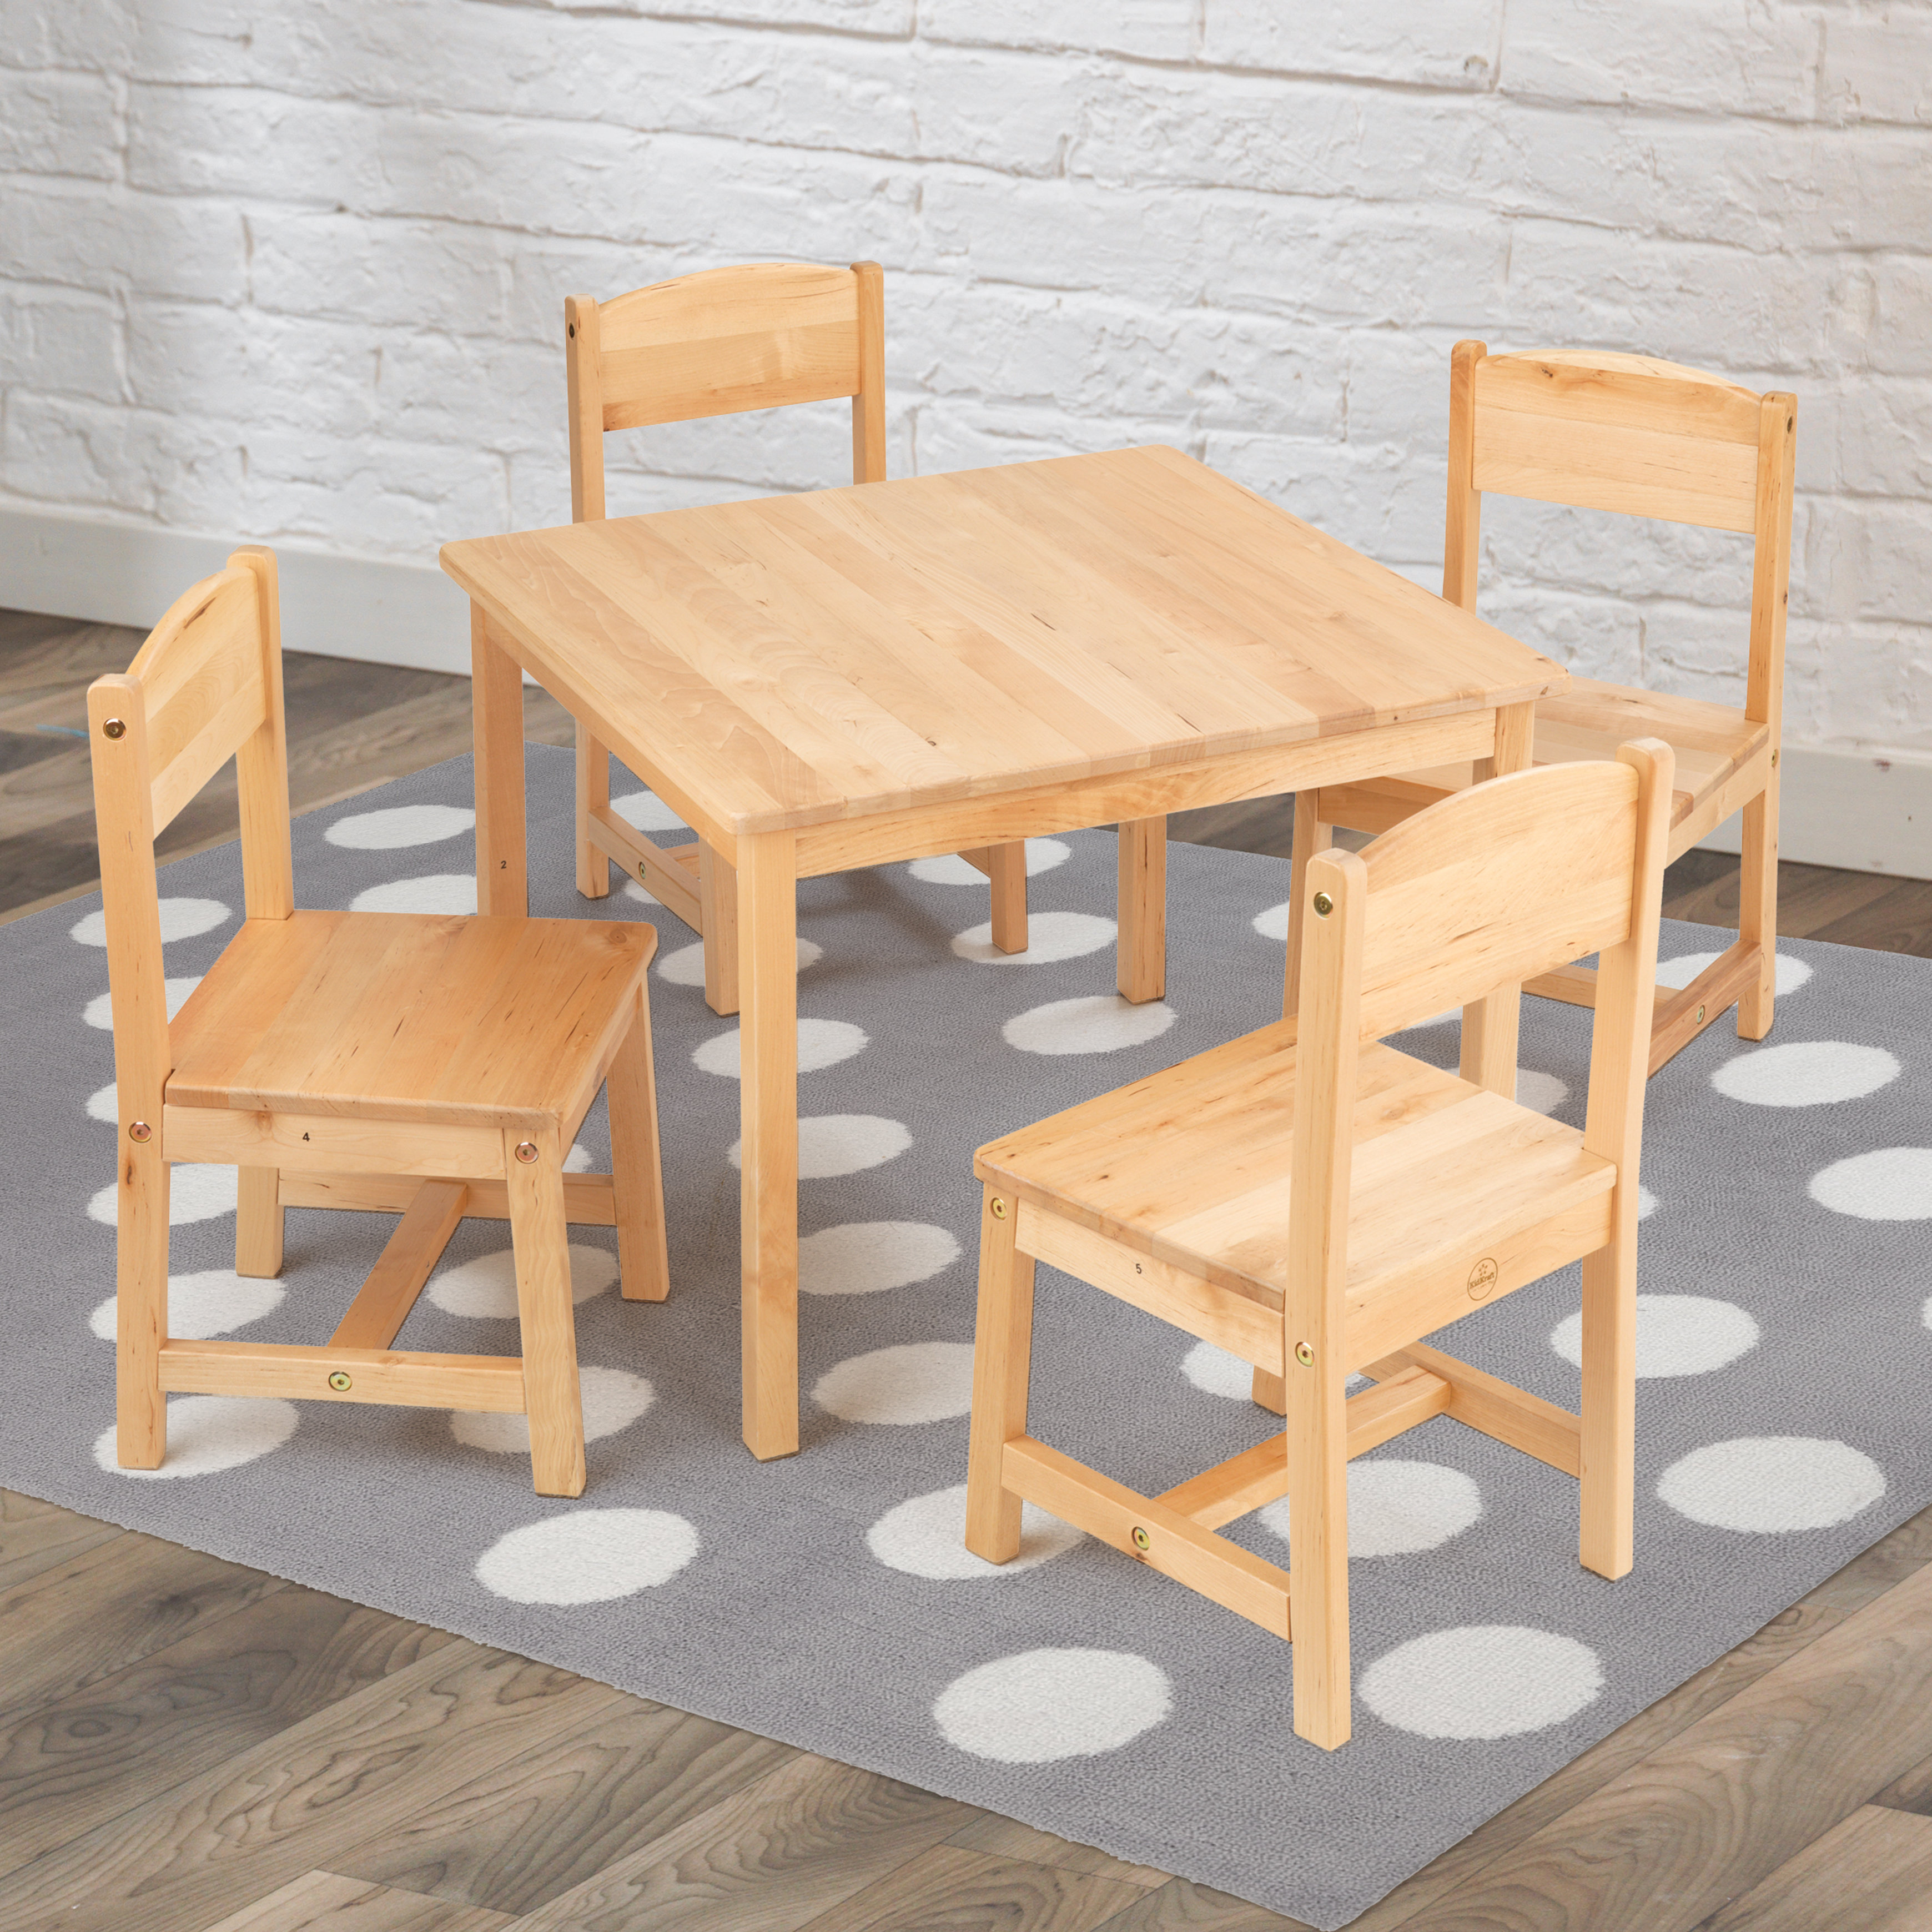 Details about   Plastic Kids Table And 2 Chairs Set For Boys Or Girls Toddler Reading Writing 